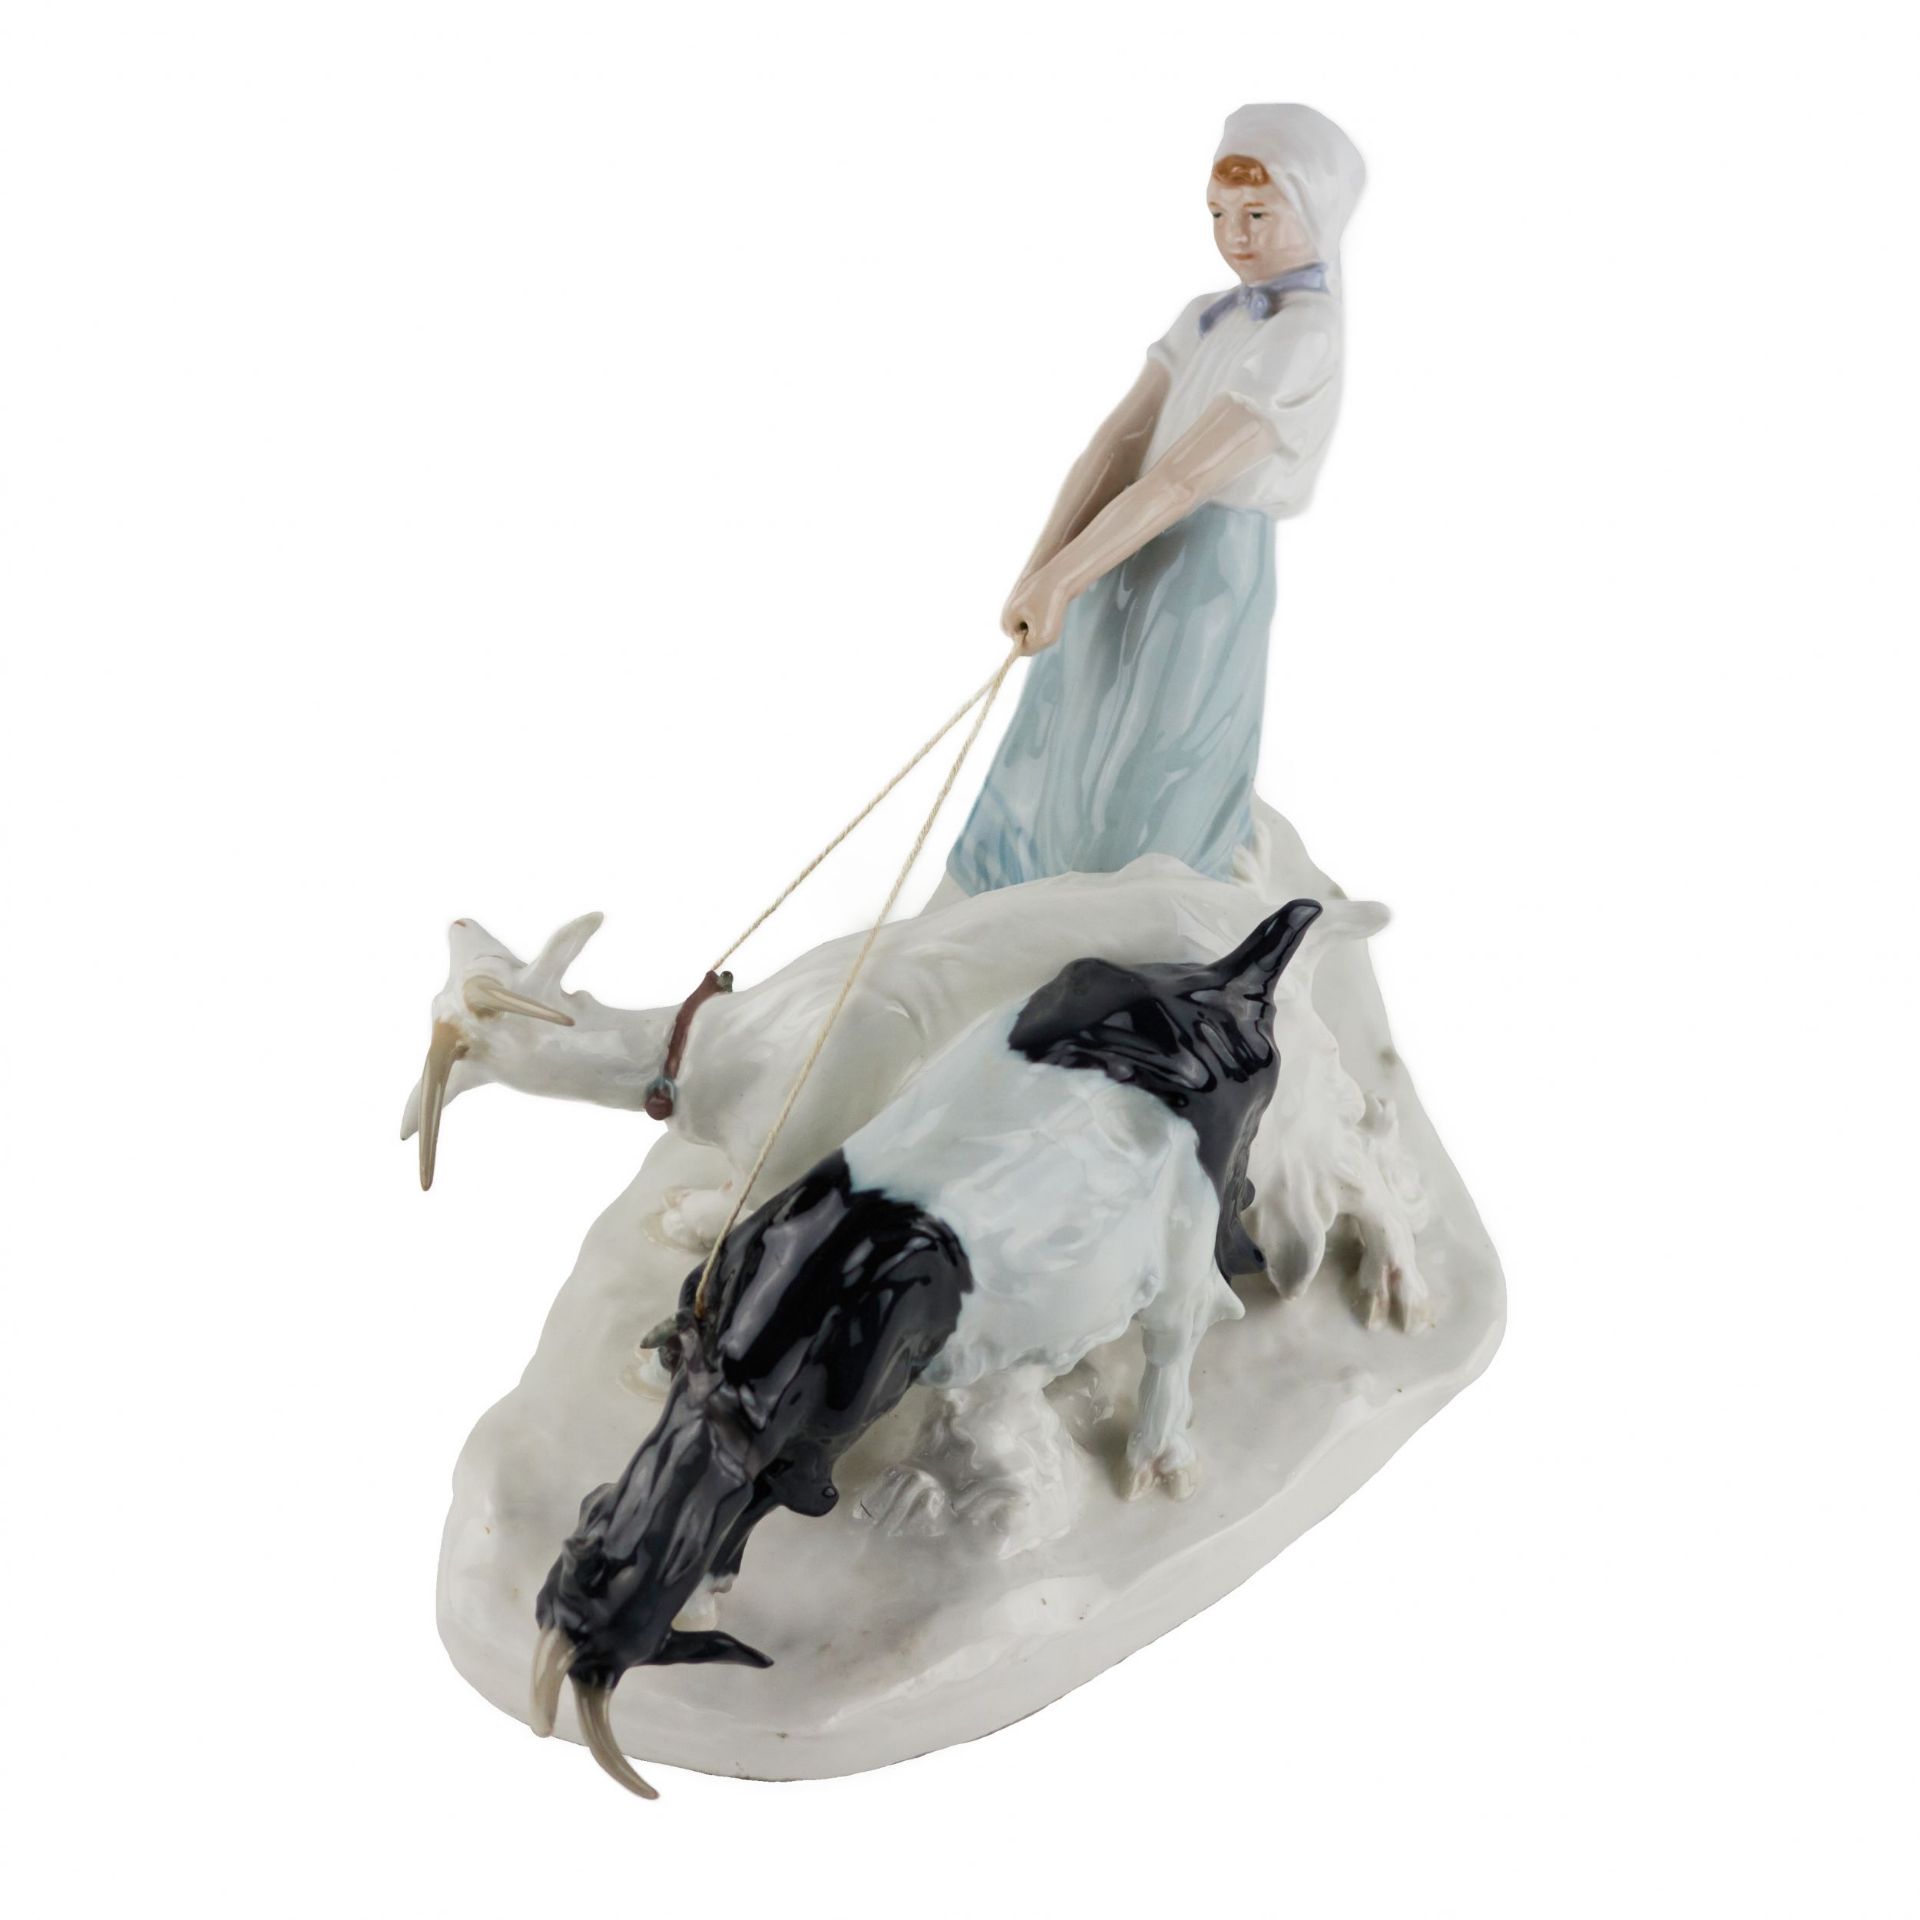 Porcelain composition Shepherdess with goats. Pilz, Otto. Meissen. 1850-1924. - Image 6 of 7